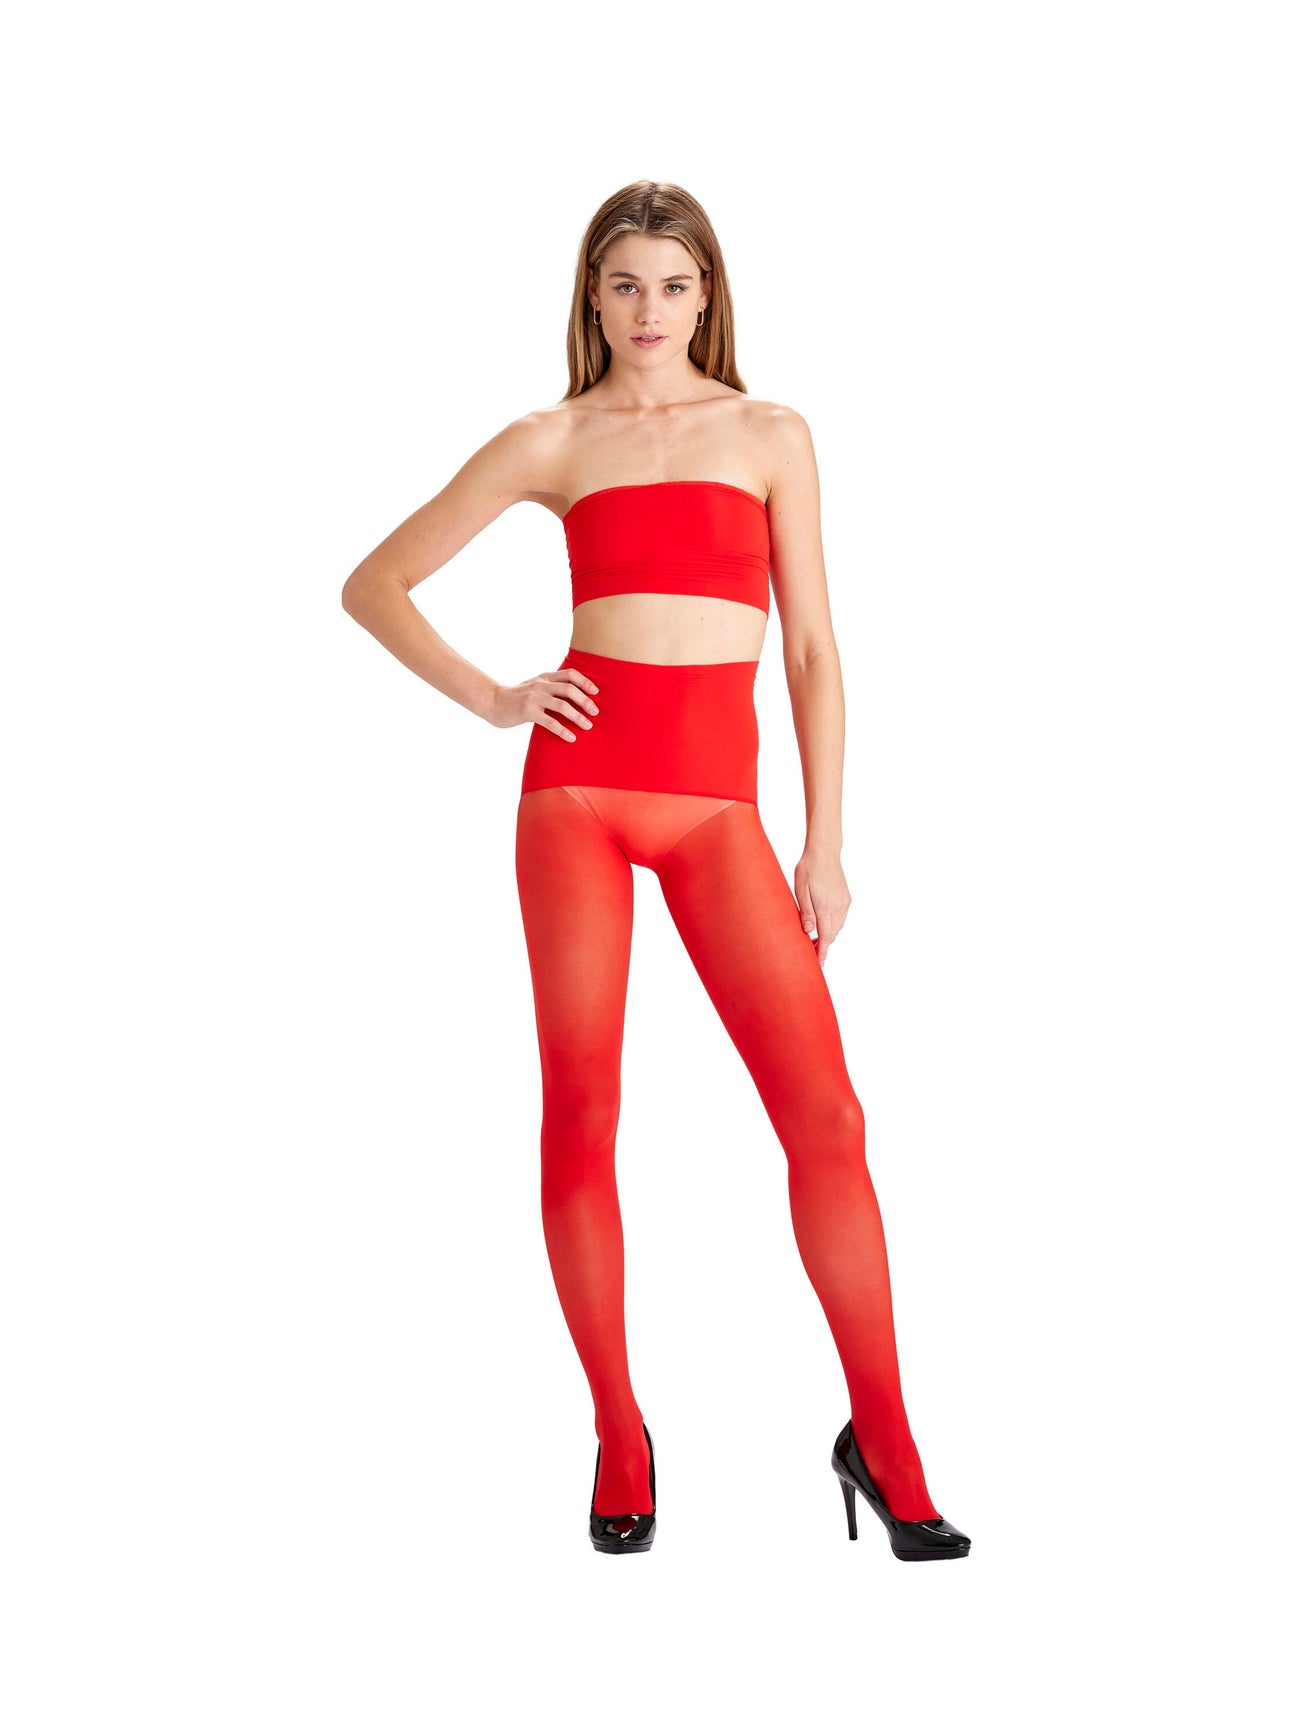 Heist 35 denier tights are semi opaque, giving you a subtle highlight colour. Available now in new limited shades.